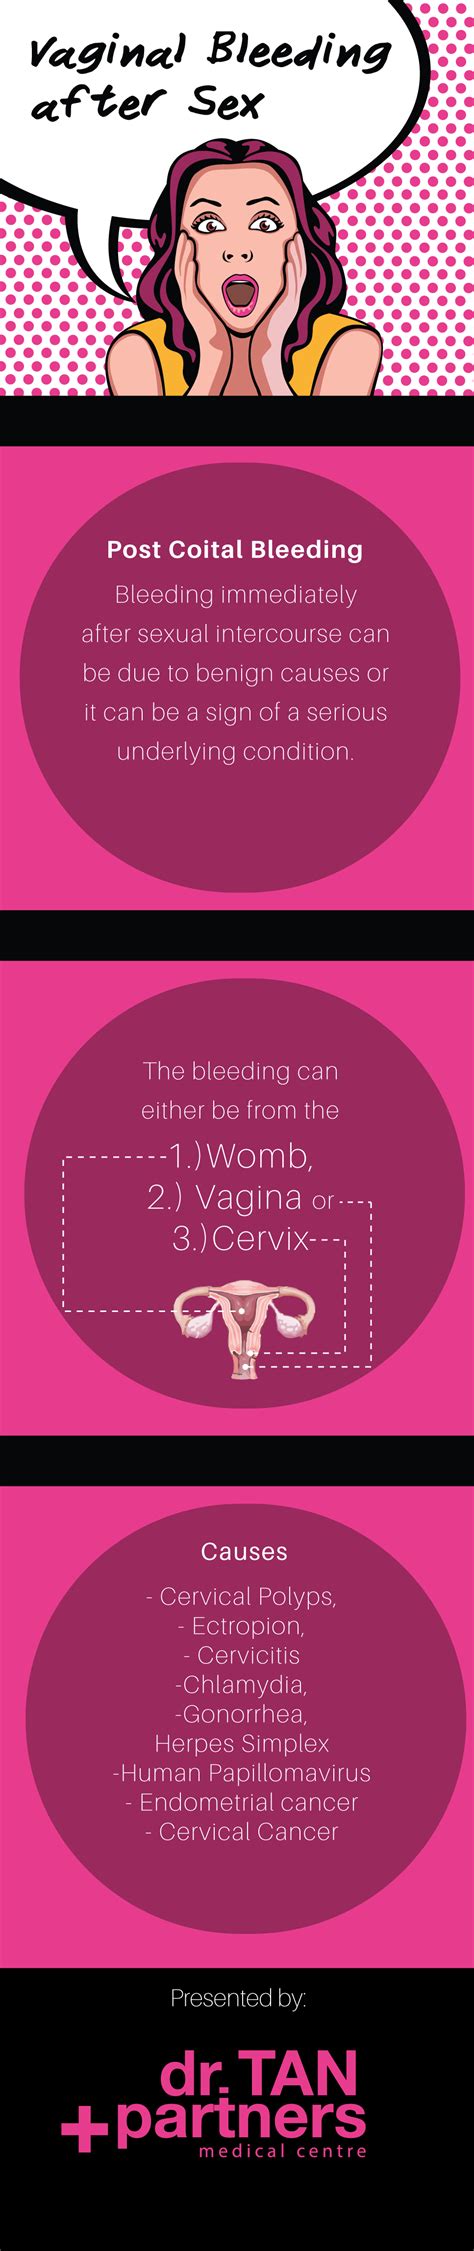 The Causes Of Vaginal Bleeding After Sex Post Coital Bleeding Hiv